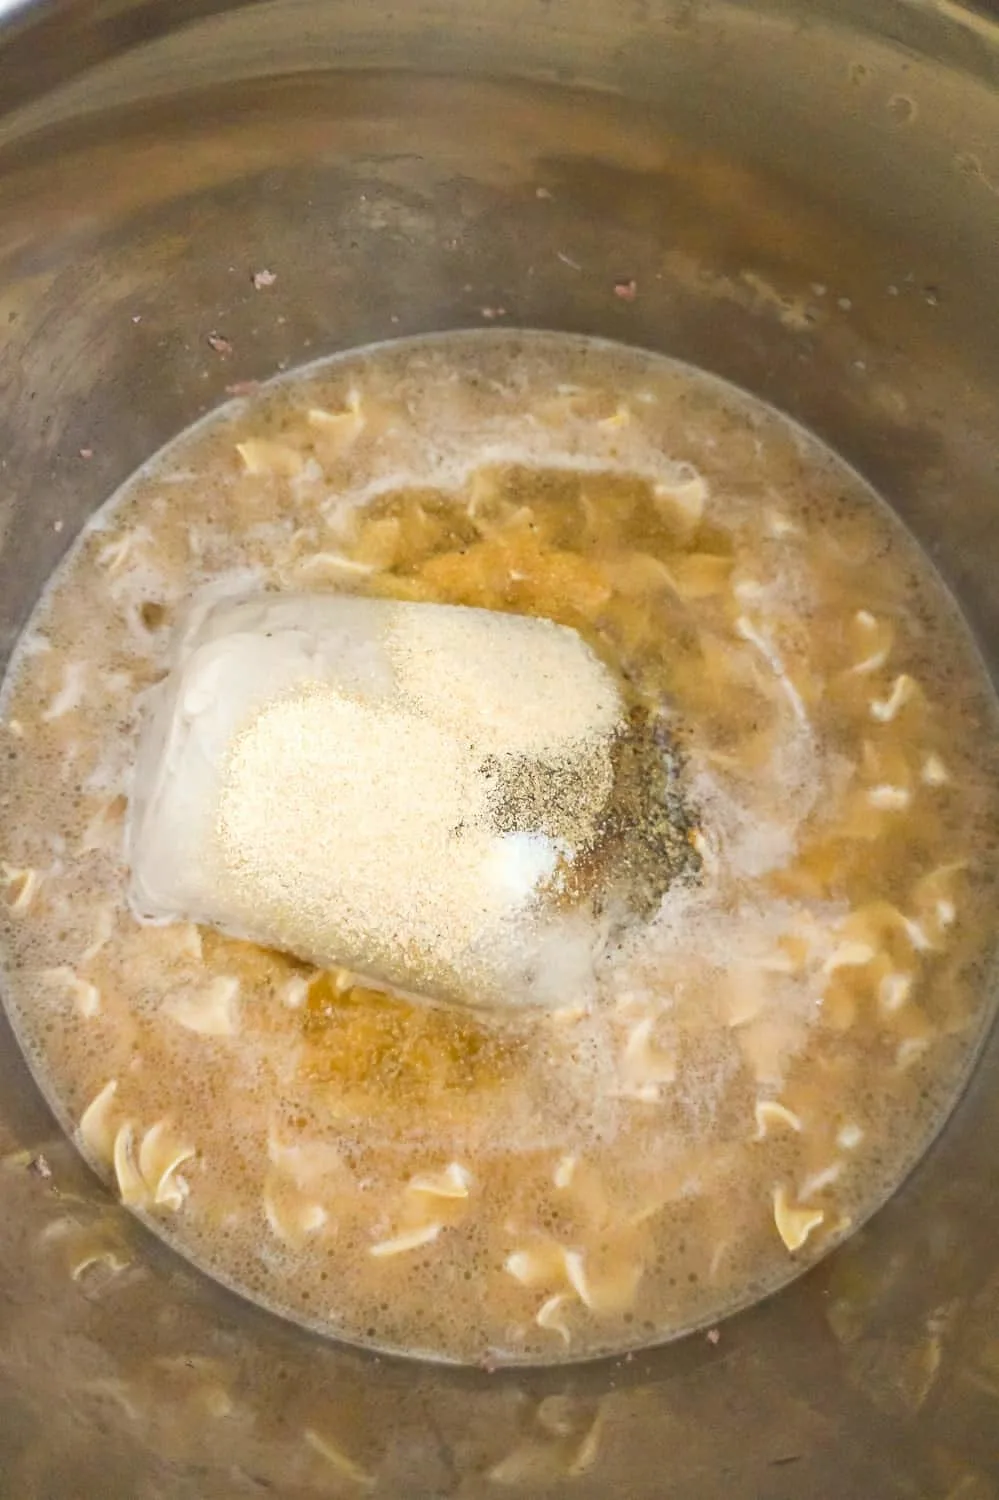 condensed cream of mushroom soup, spices, egg noodles and liquid in an Instant POt